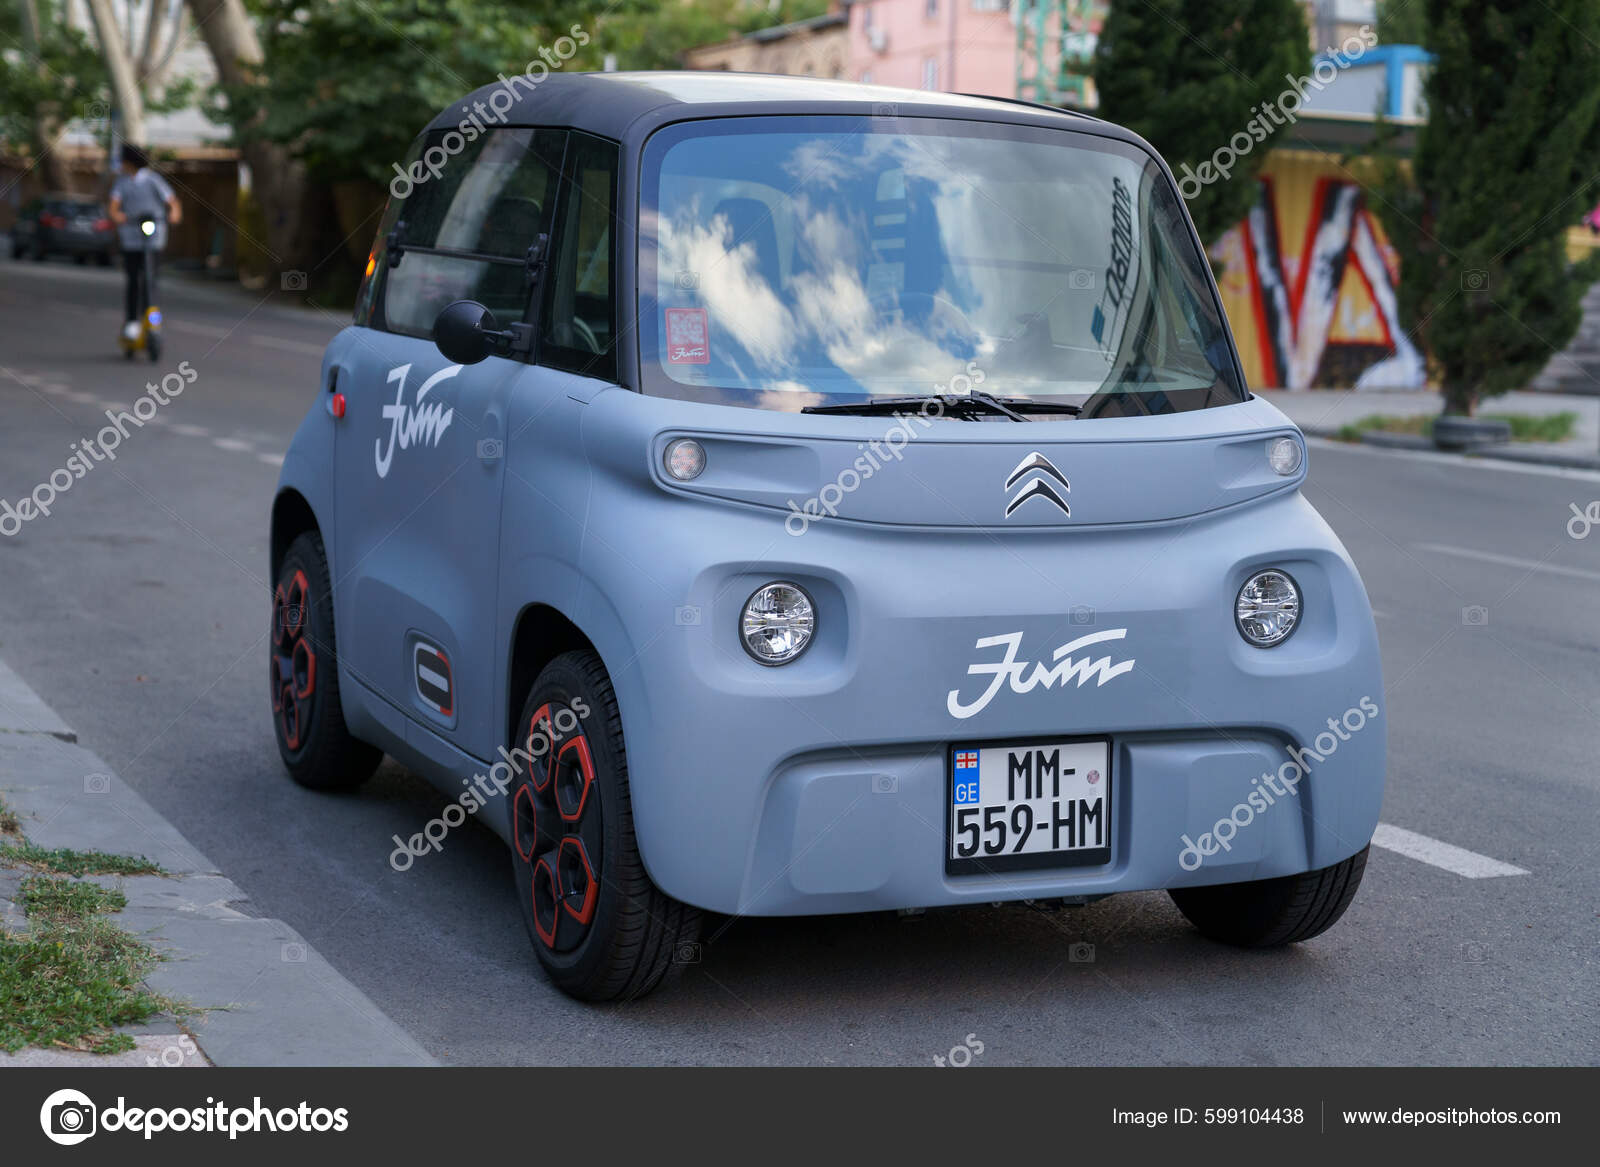 Tiny Citroen Ami electric car to be sold by Opel as the Rocks-e